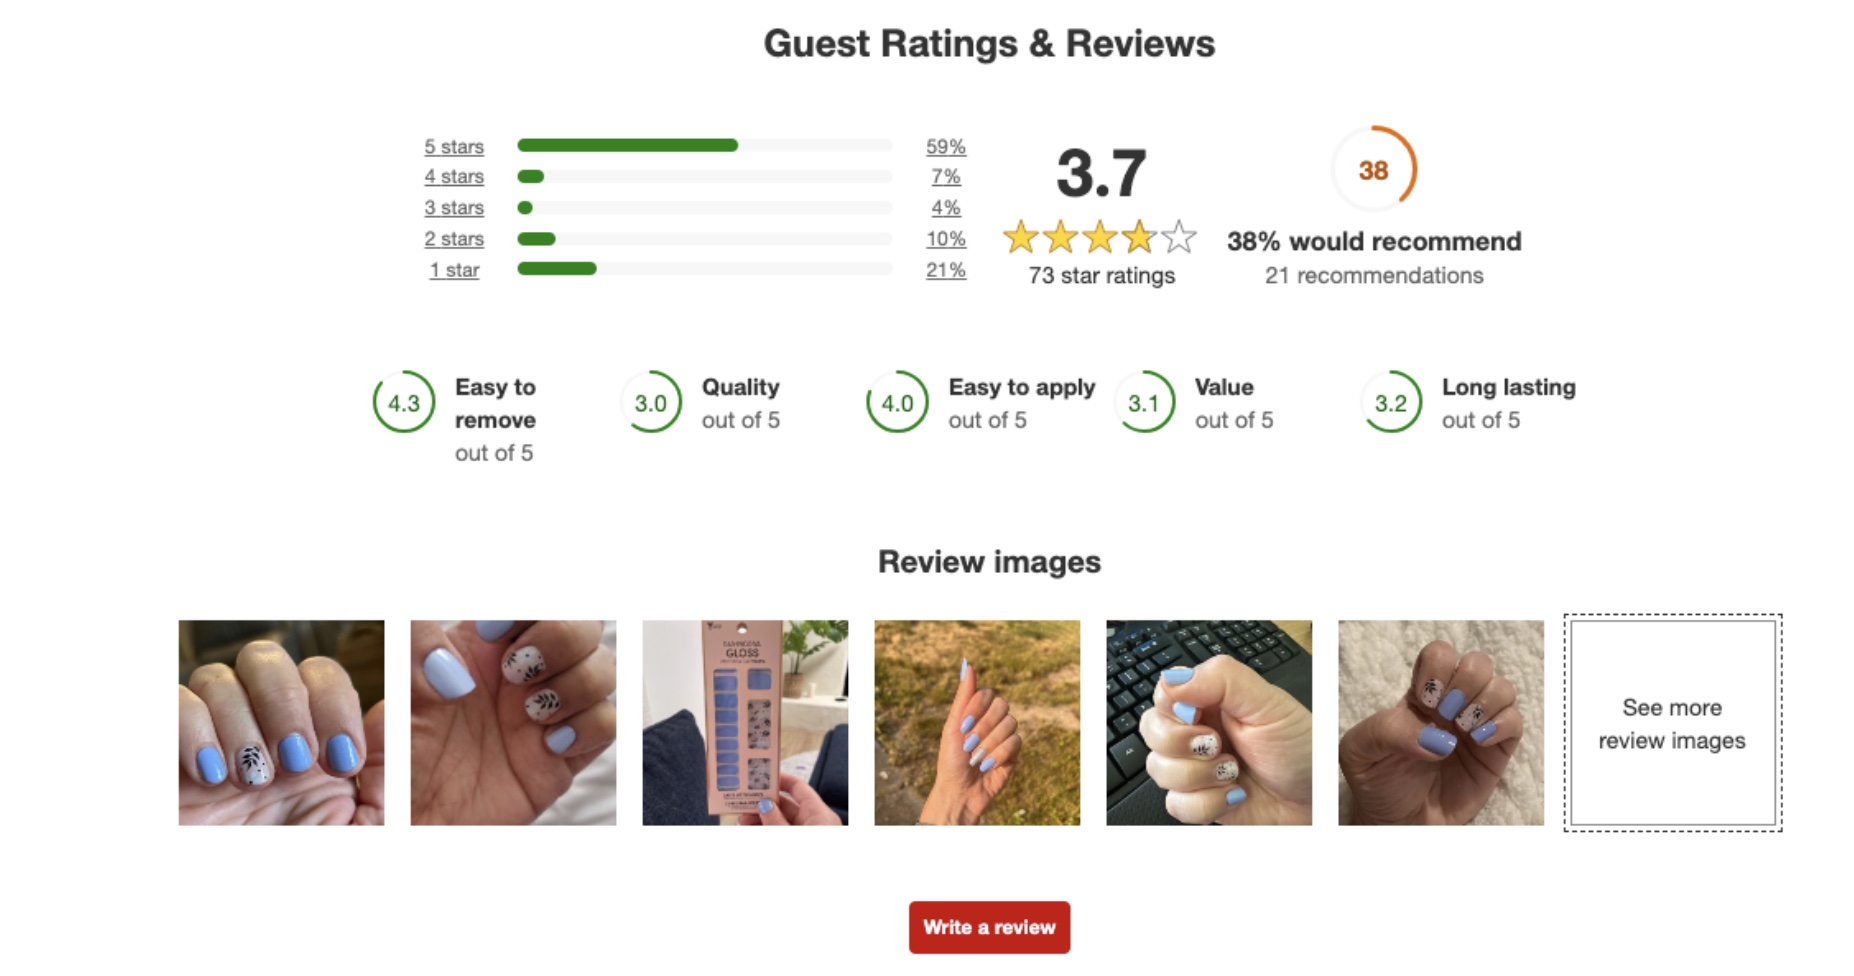 Reviews for an acrylic nail product from Target.com